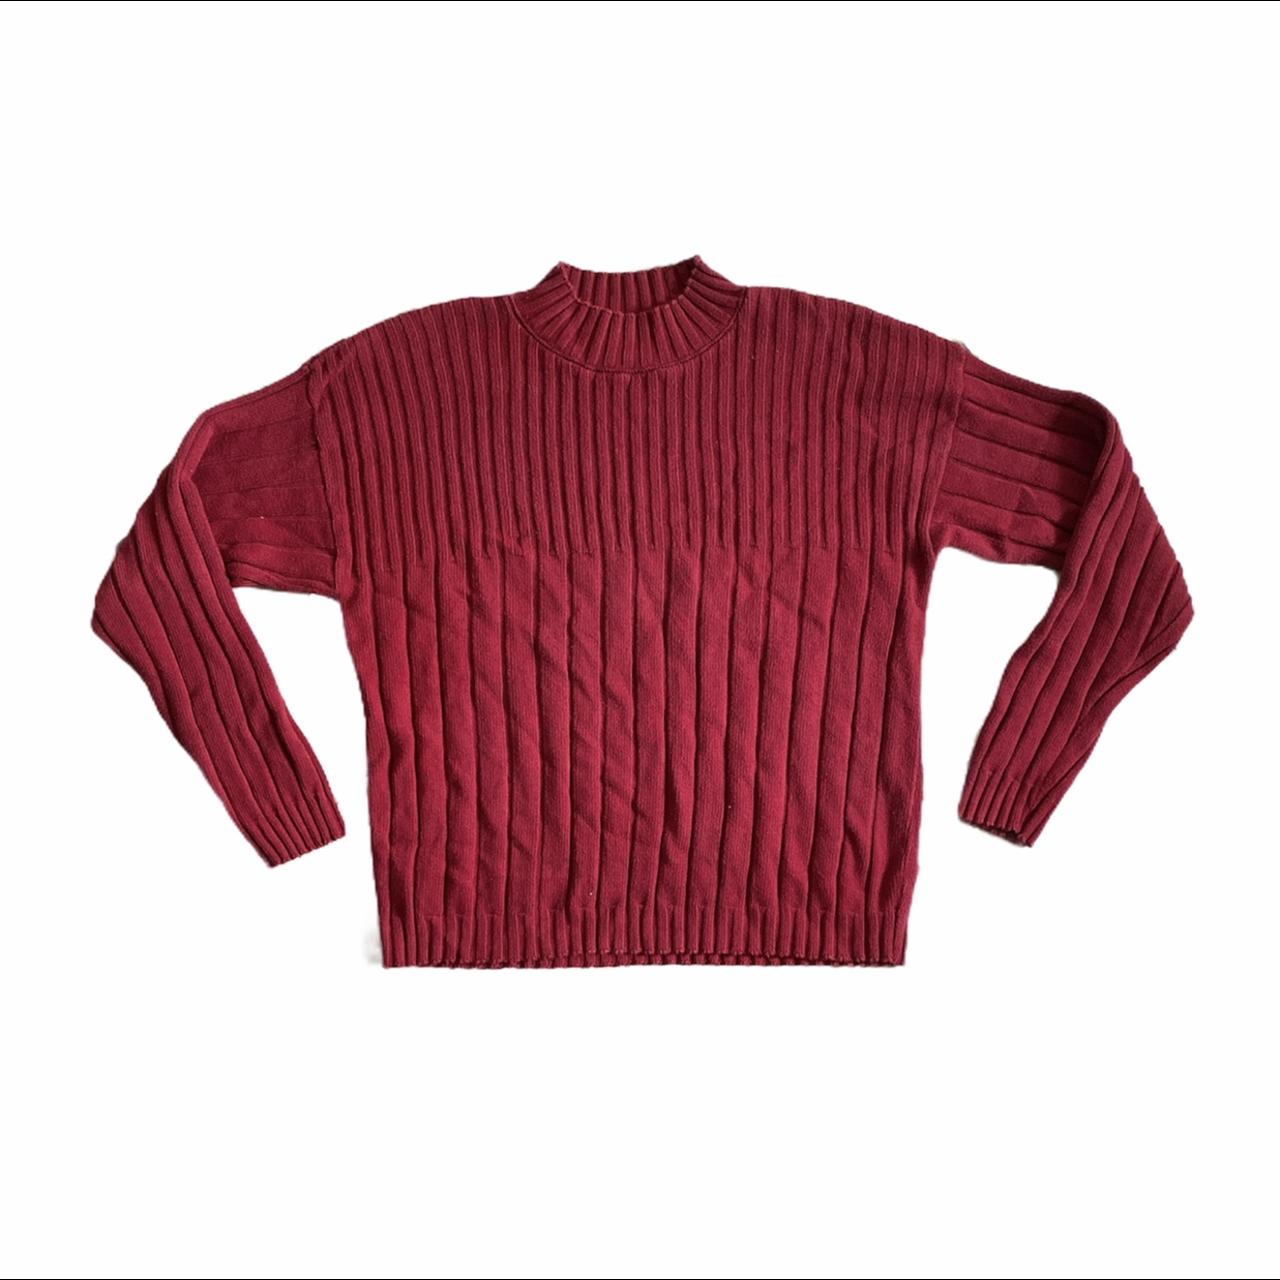 Early 2000s ribbed, red sweater will look good on... - Depop